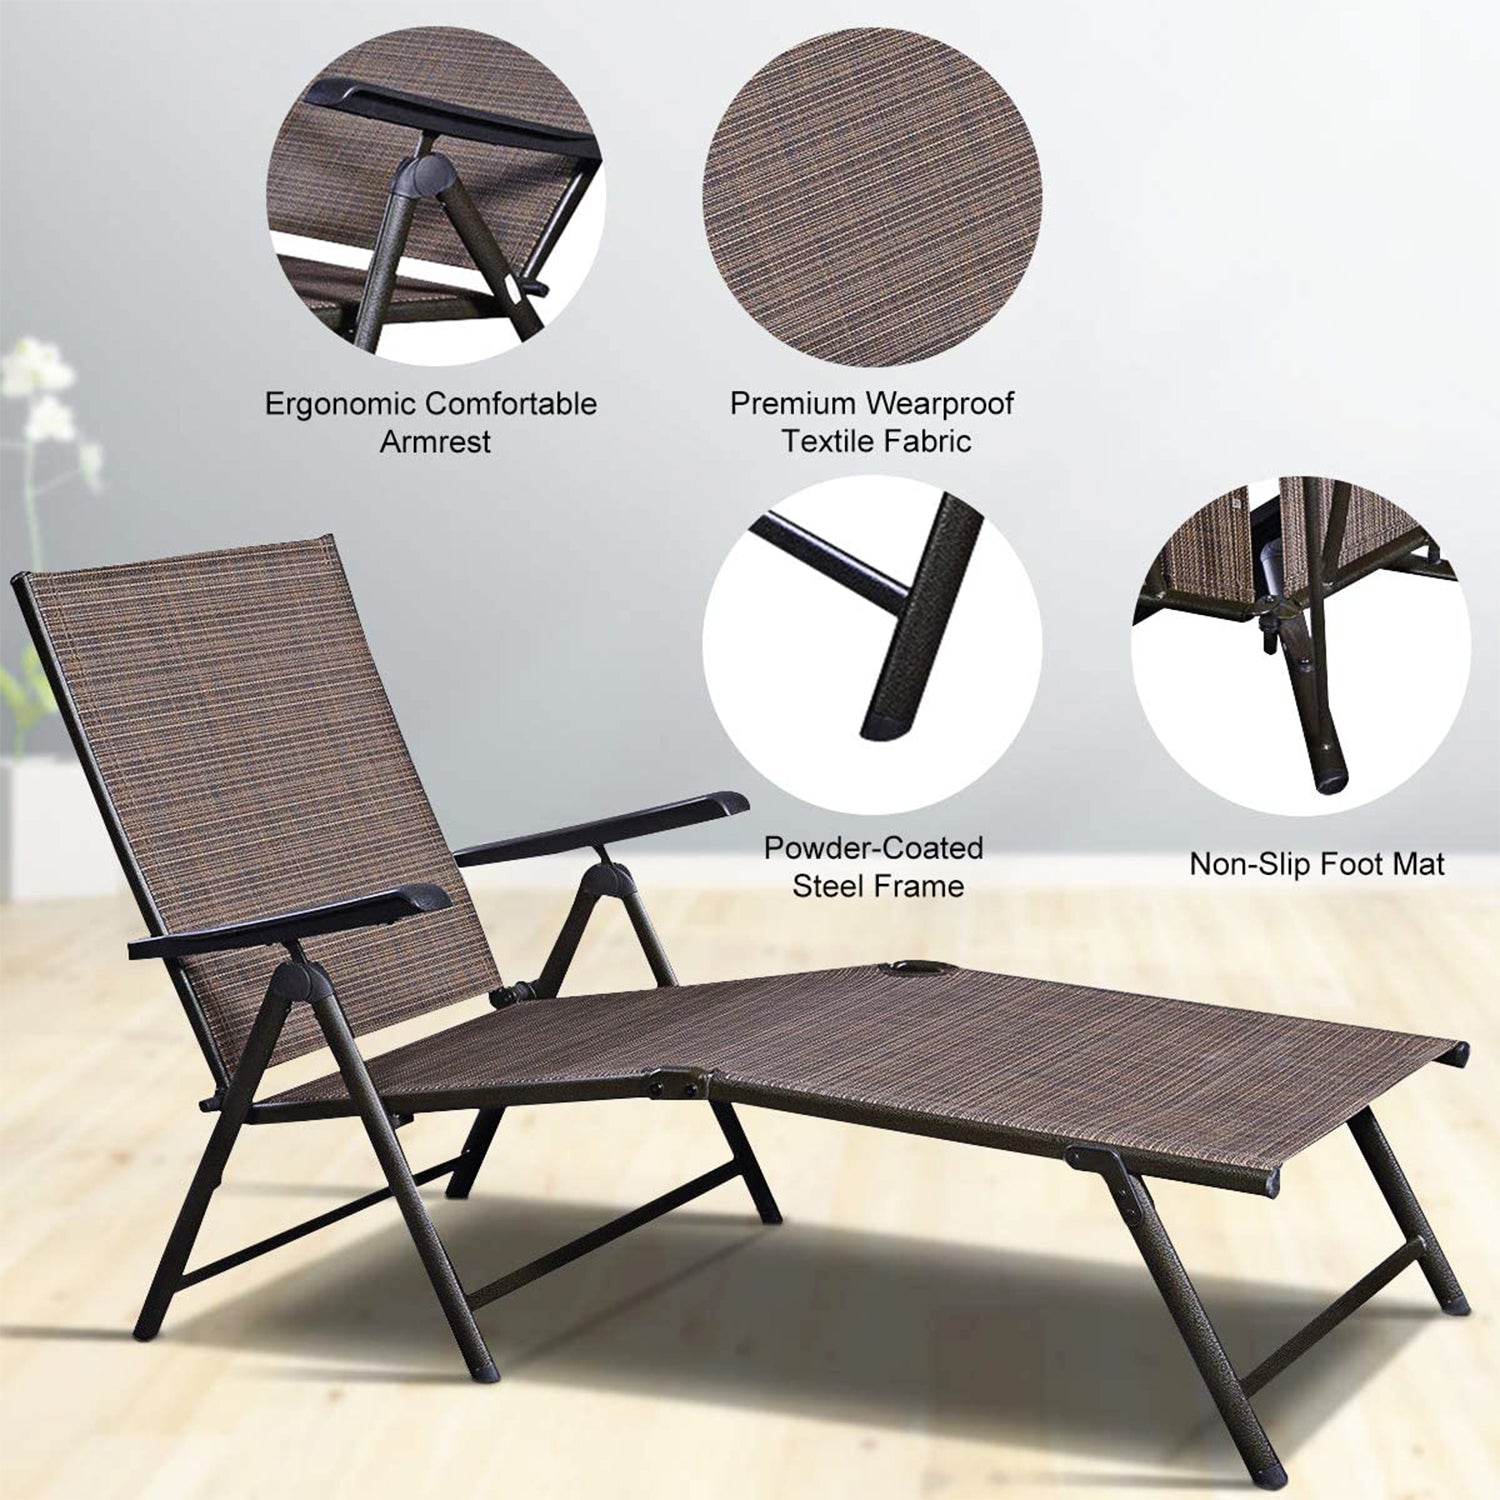 Steel Outdoor Chaise Lounge Chair Adjustable Folding Pool Lounger in Brown